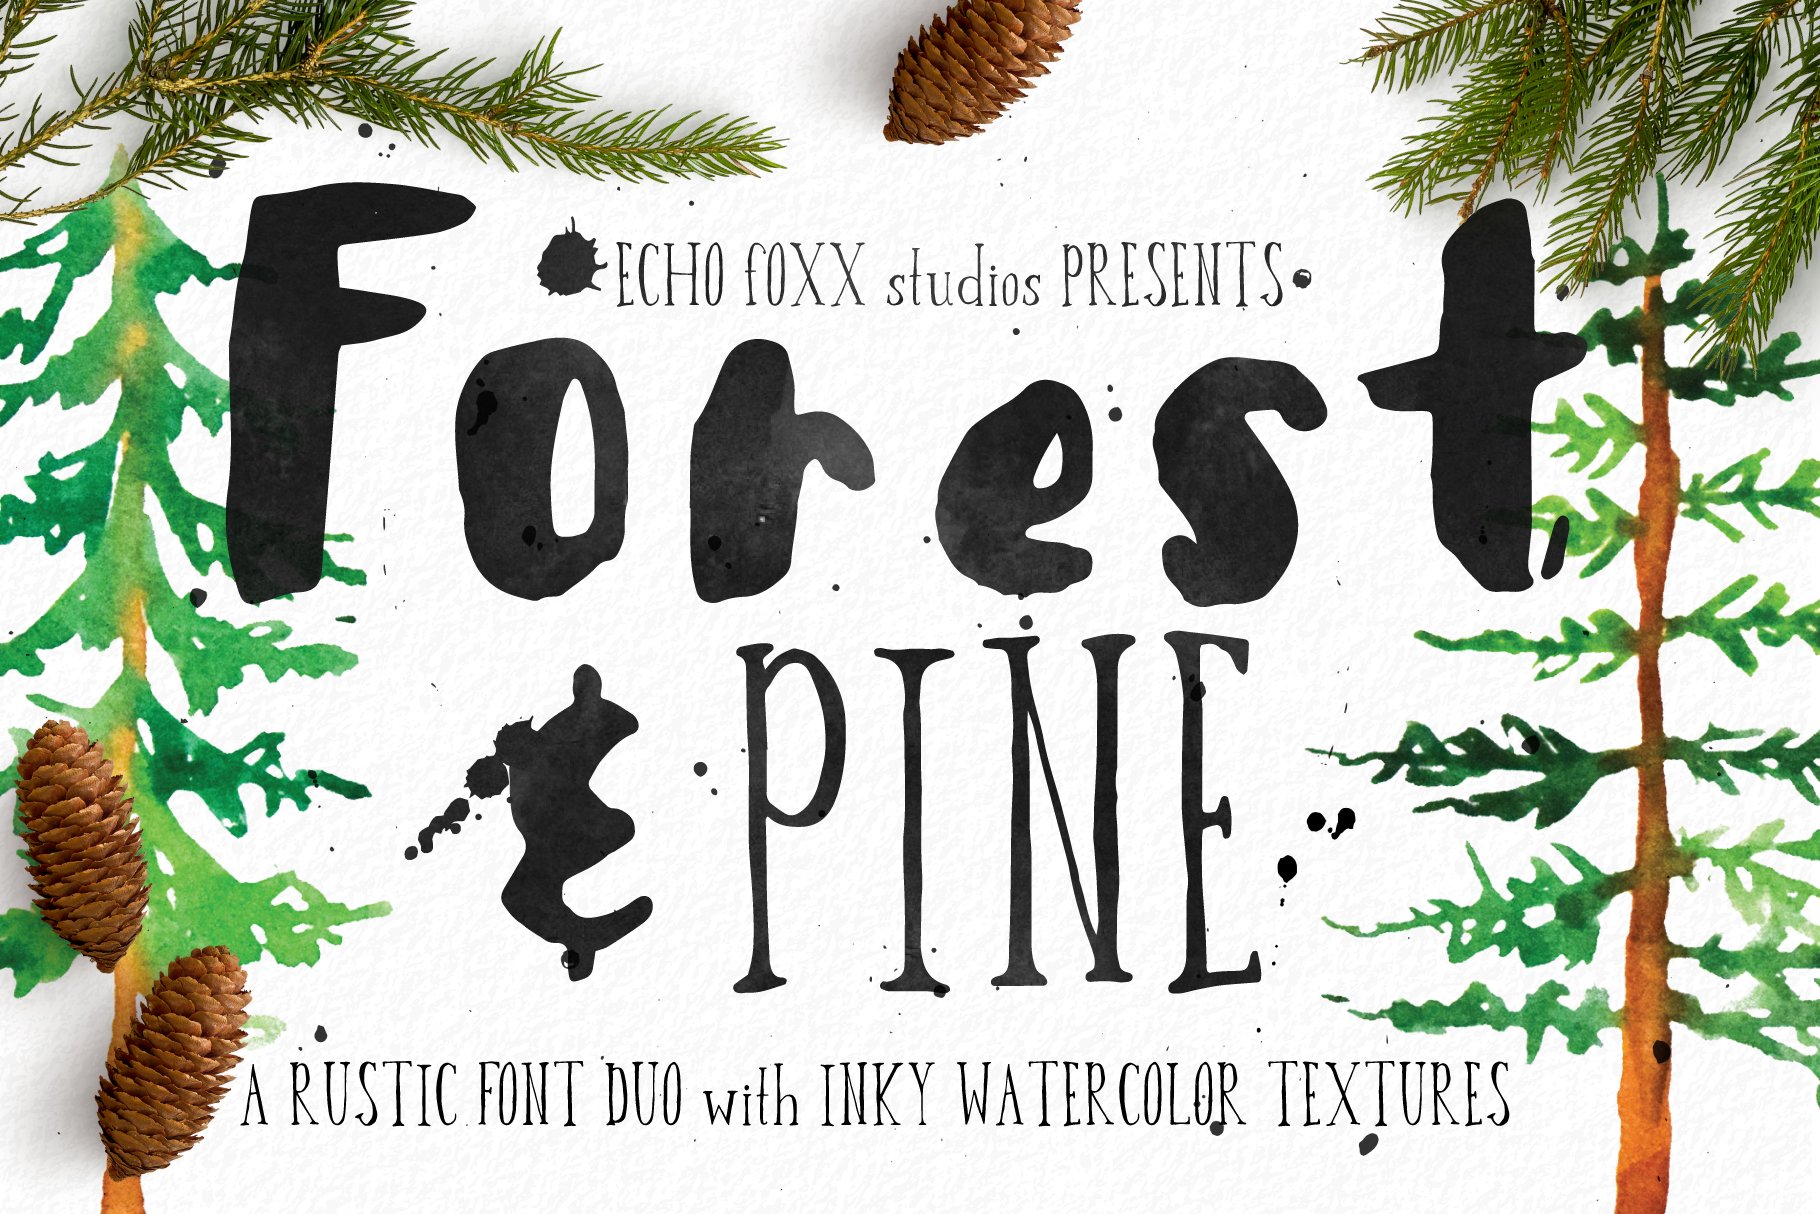 Forest & Pine Textured Font Bundle cover image.